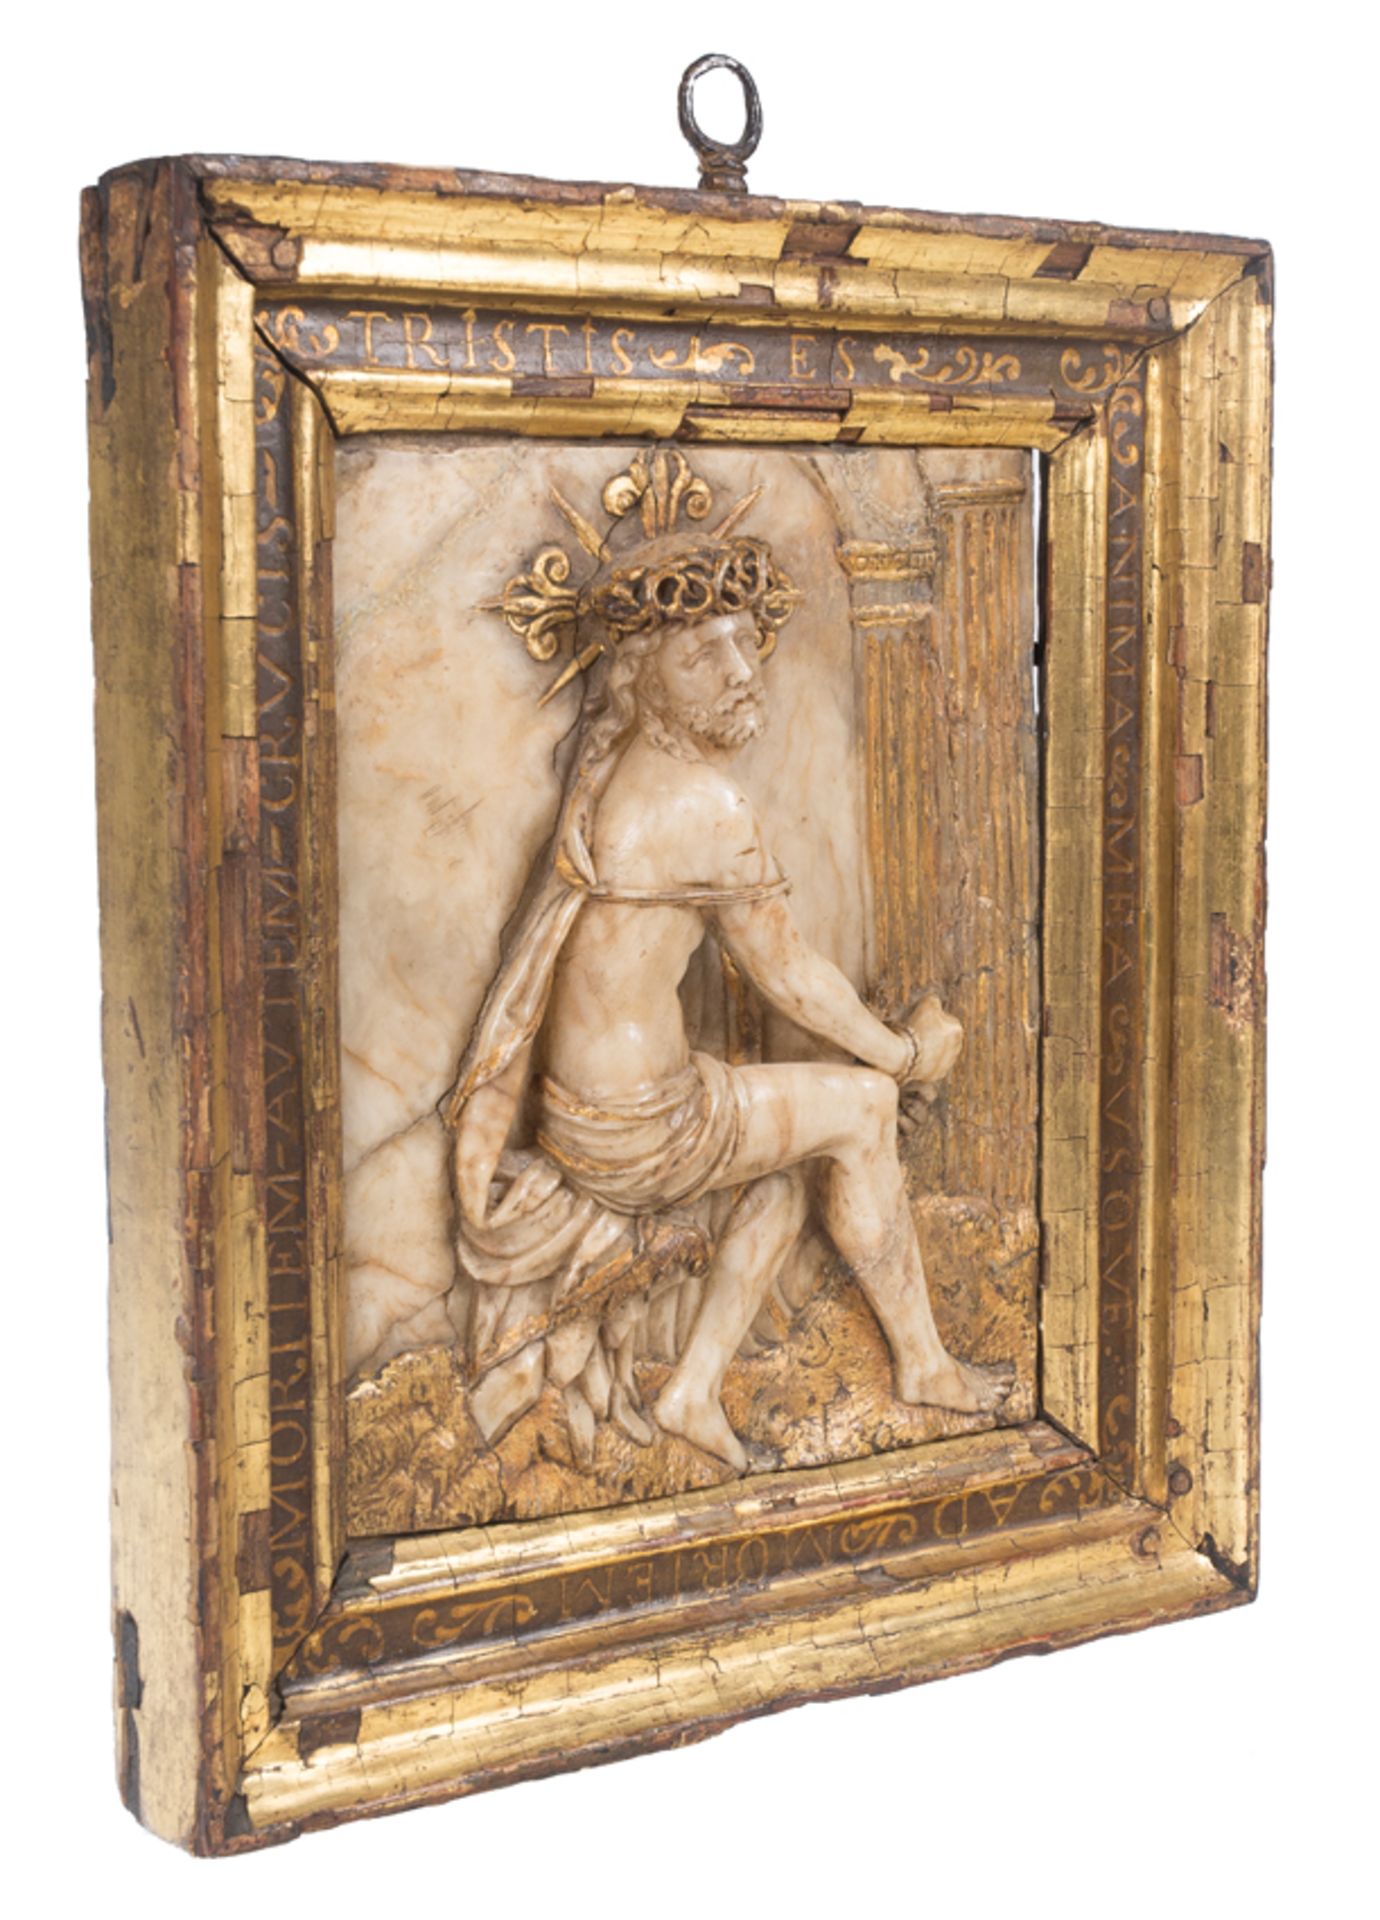 Sculpted and gilded alabaster relief. Spanish School. Renaissance. Early 16th century. - Bild 7 aus 13